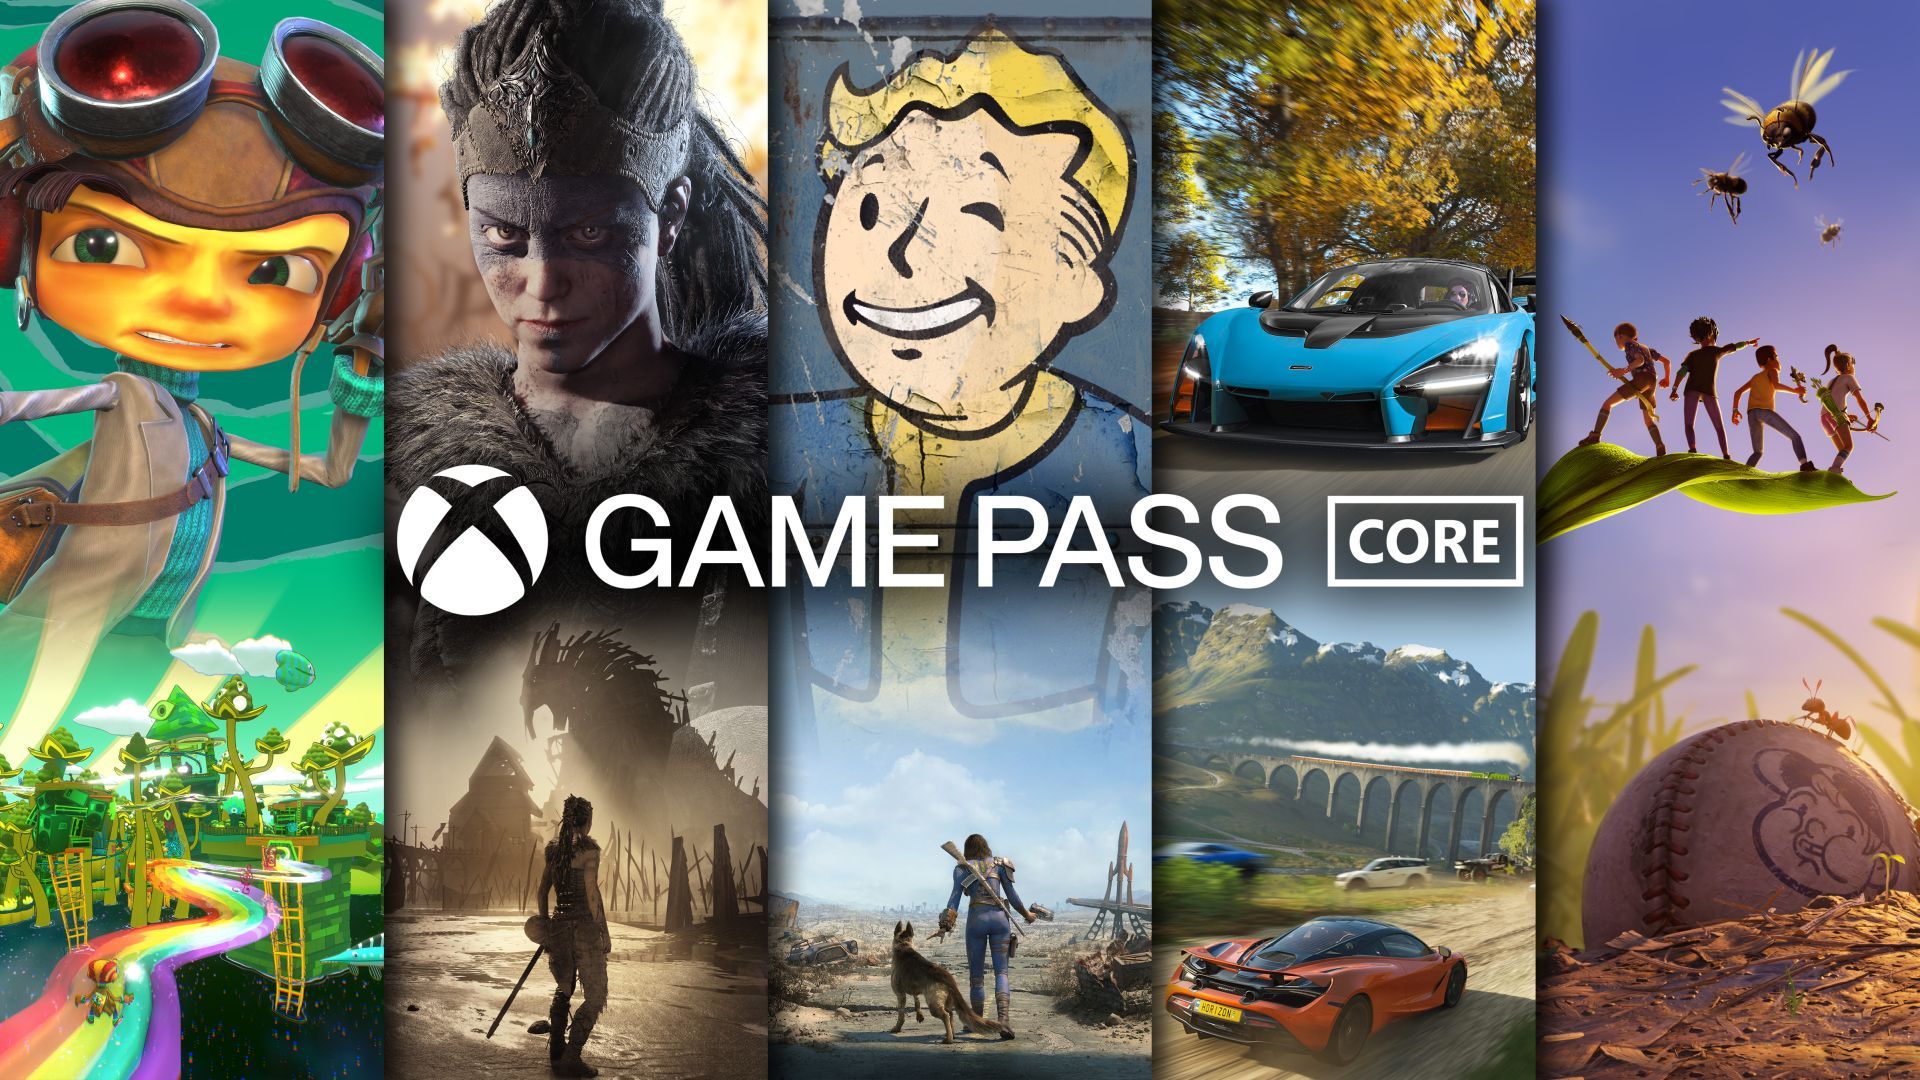 Microsoft is reportedly testing 1080p streaming for Xbox Game Pass